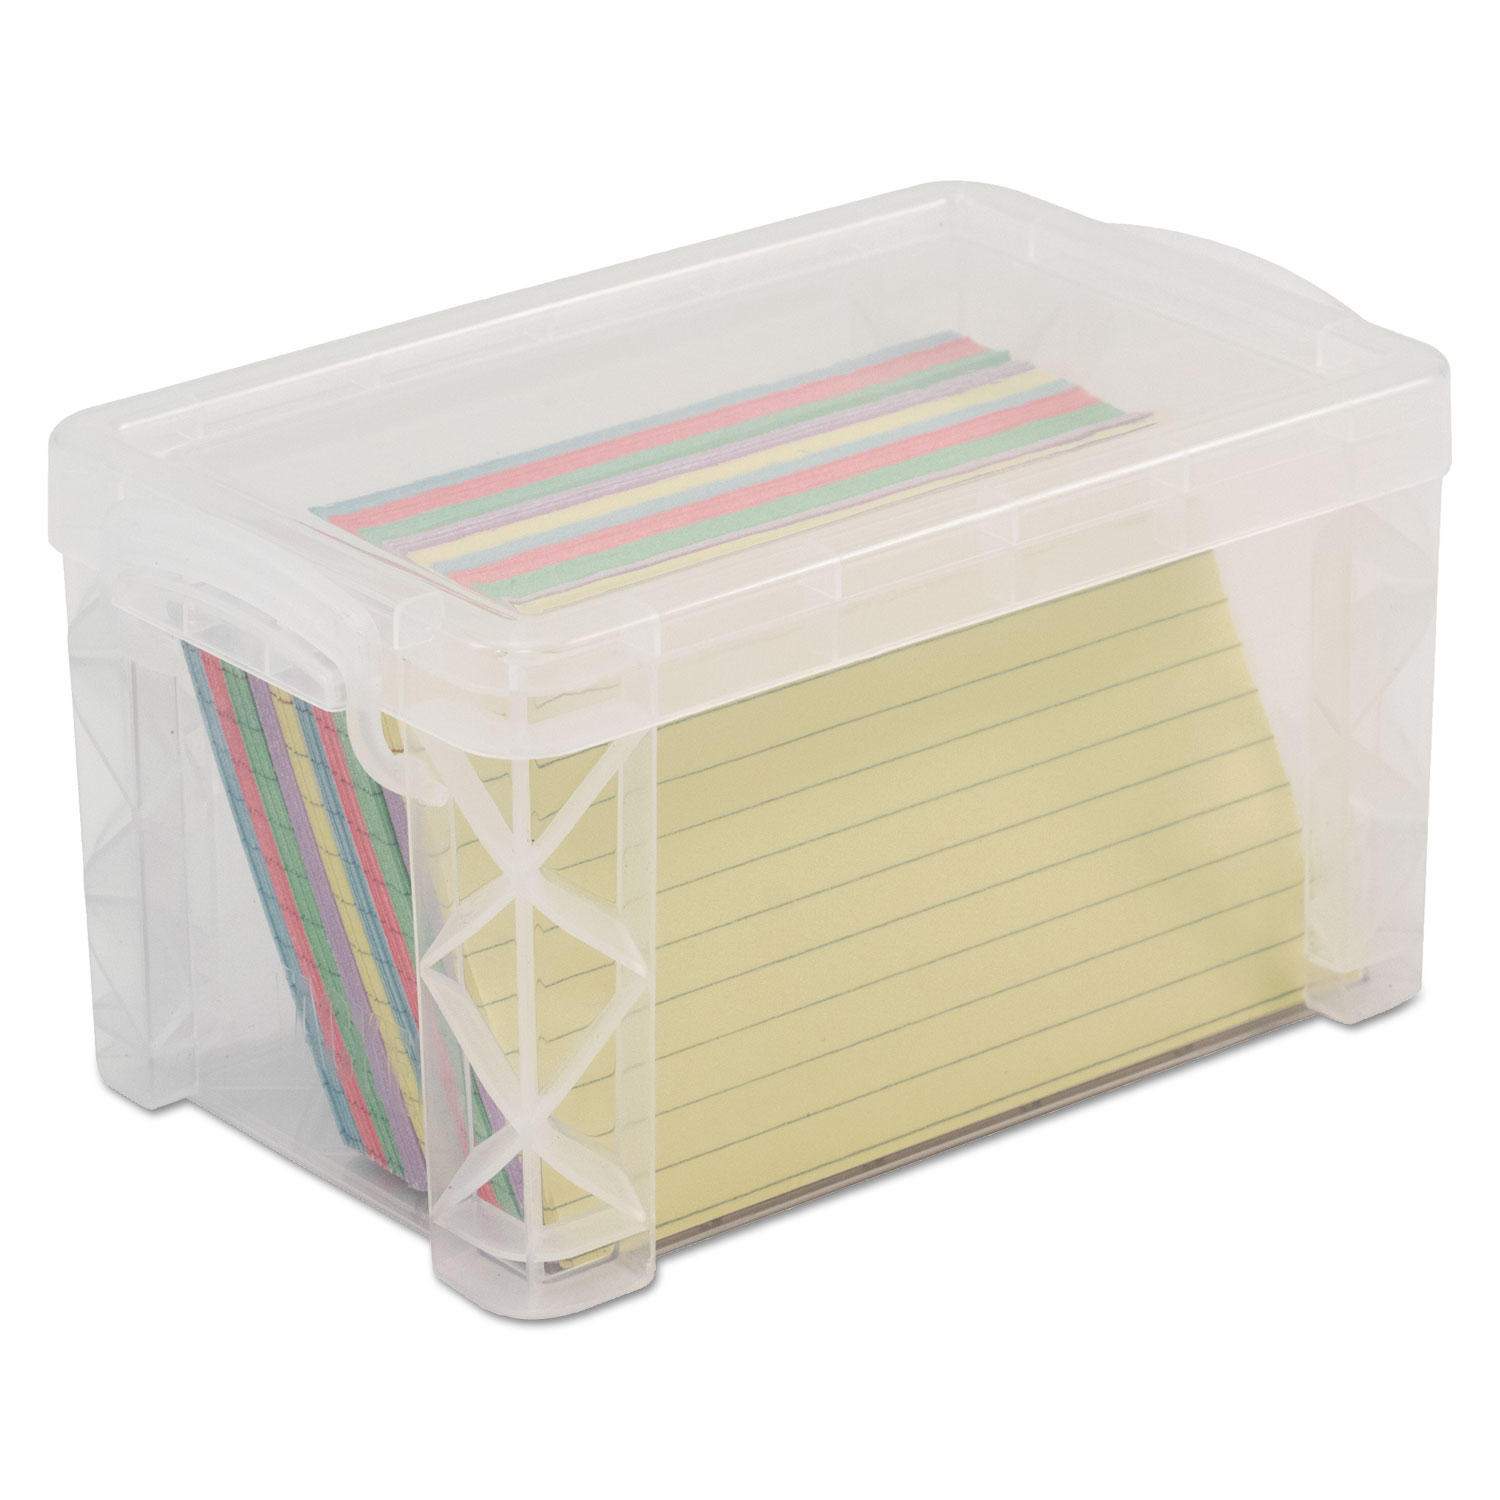 Snap-N-Store Collapsible Index Card File Box, Holds 1,100 3 x 5 Cards, Black (IDESNS01573)